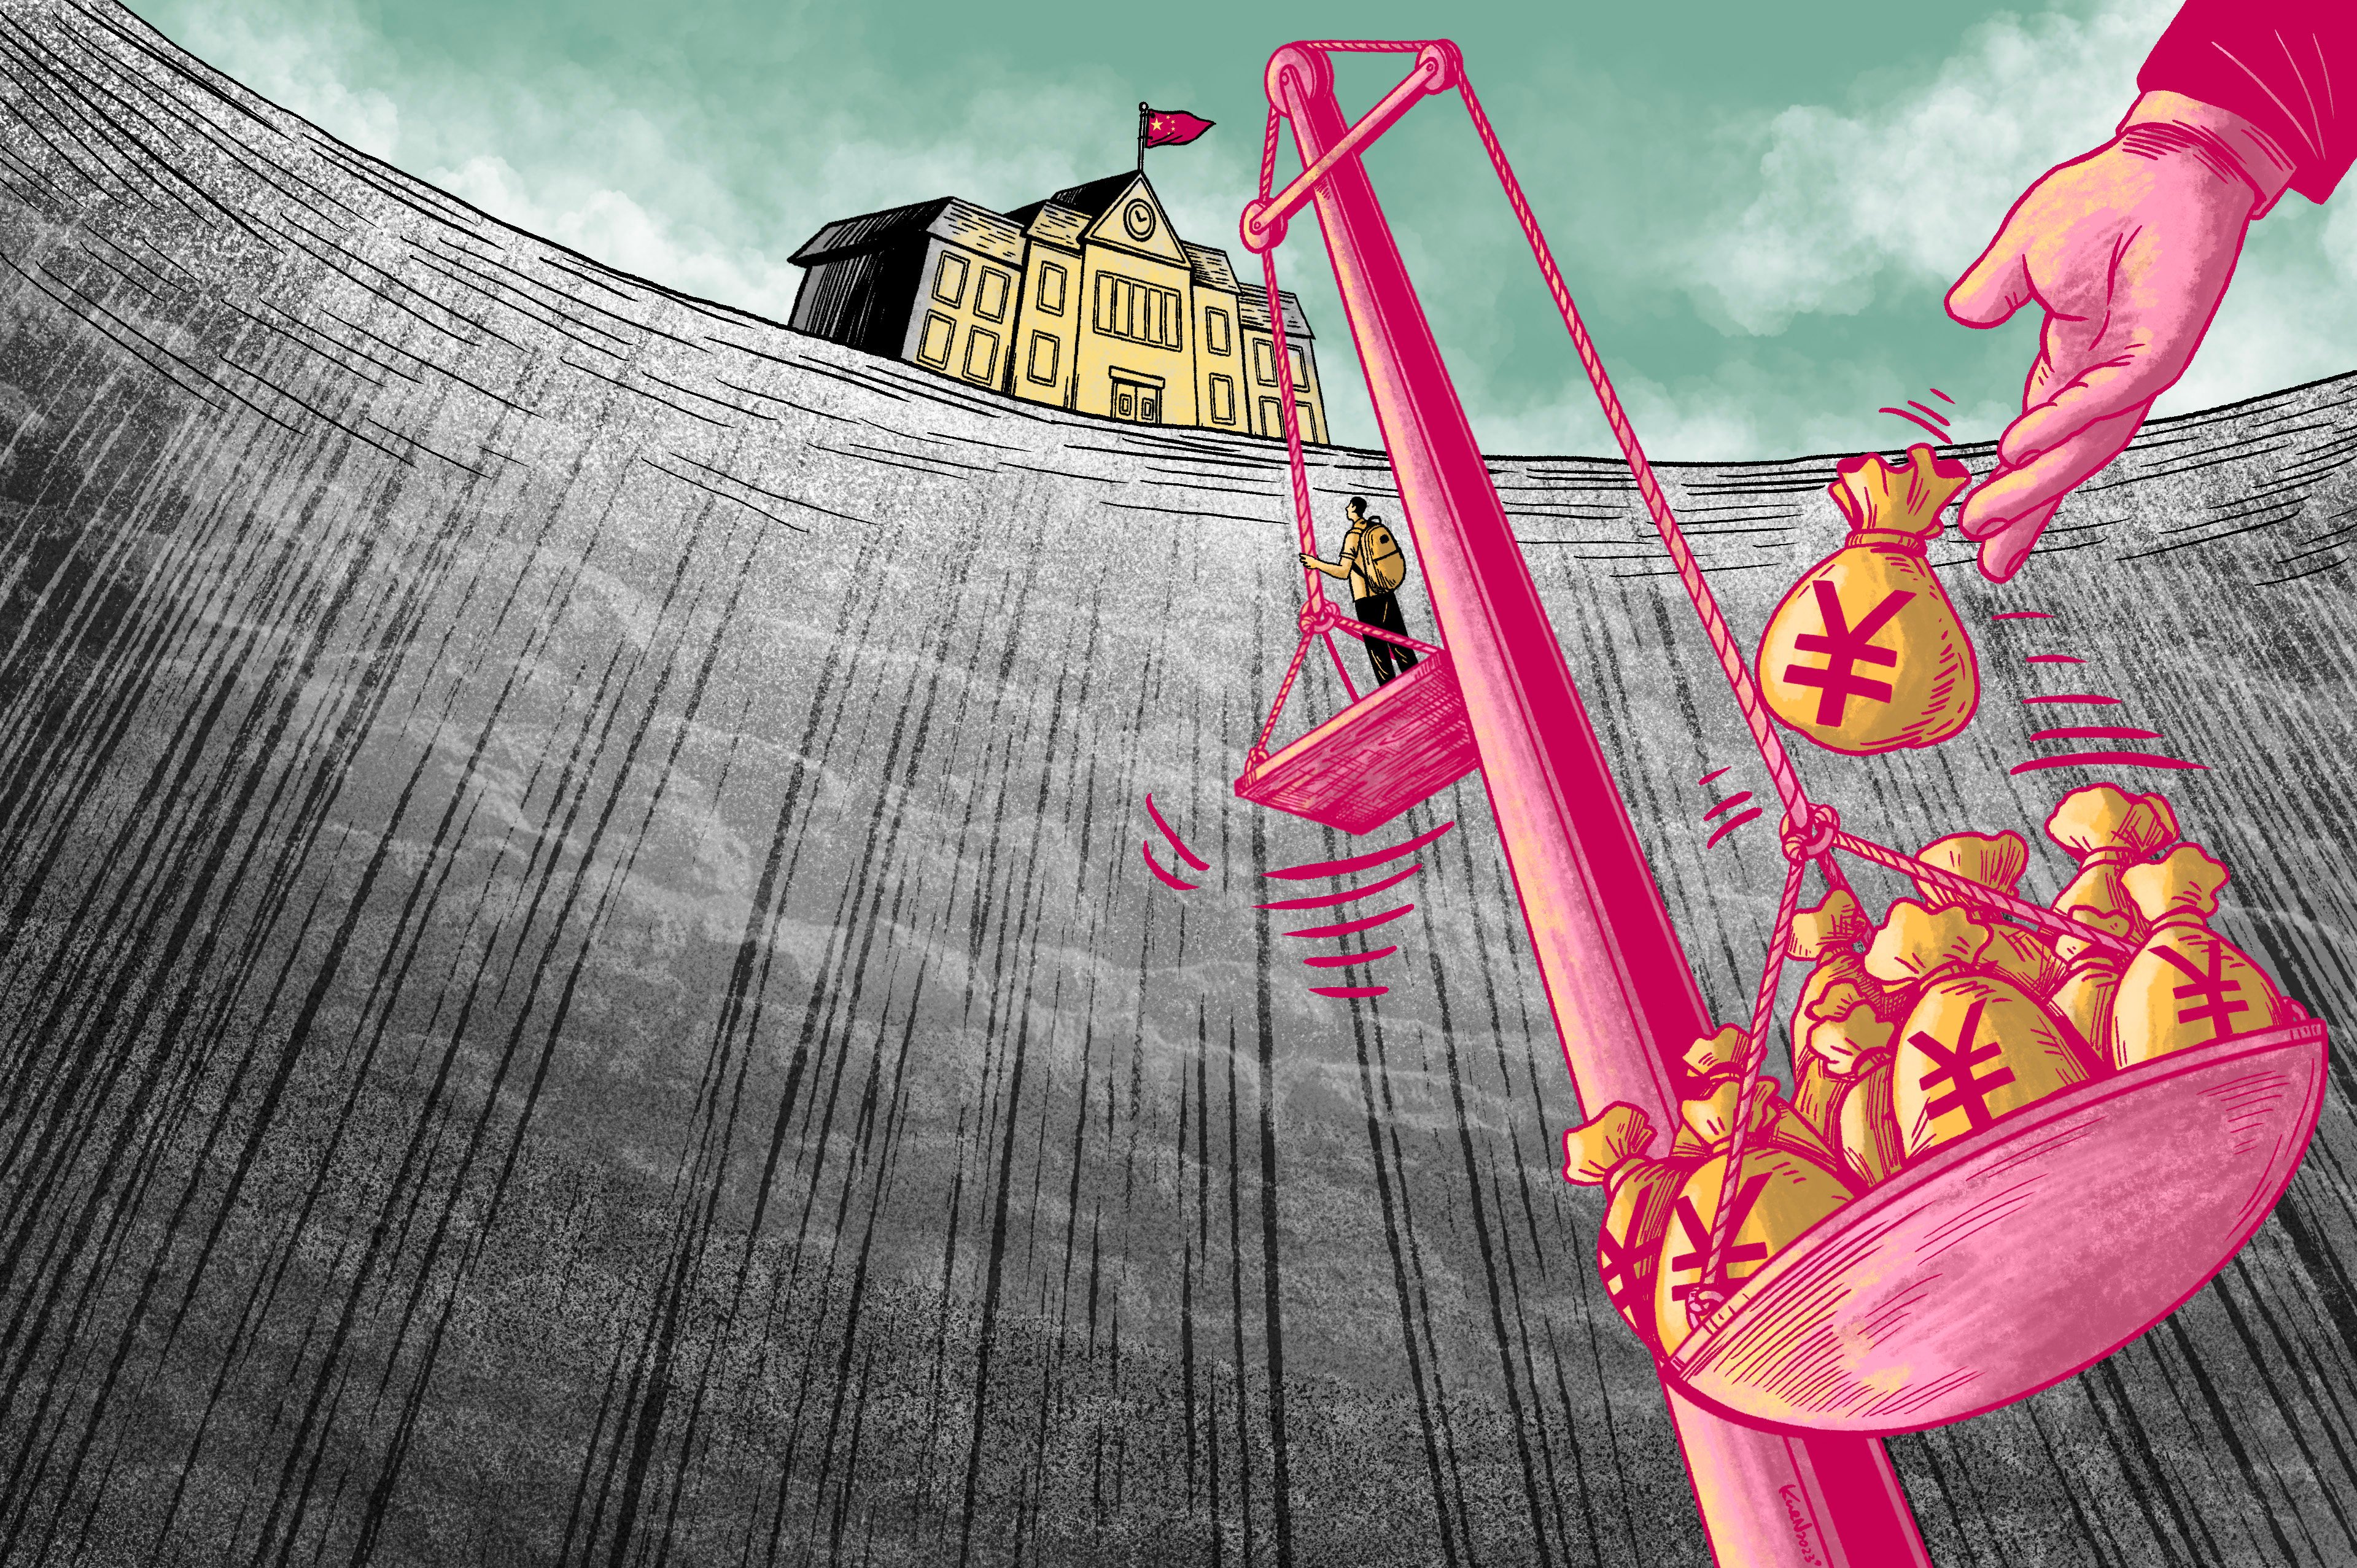 Even after education reforms intended to lower costs and narrow gaps in outcomes, the divide between rich and poor appears to be growing. Illustration: Lau Ka-kuen